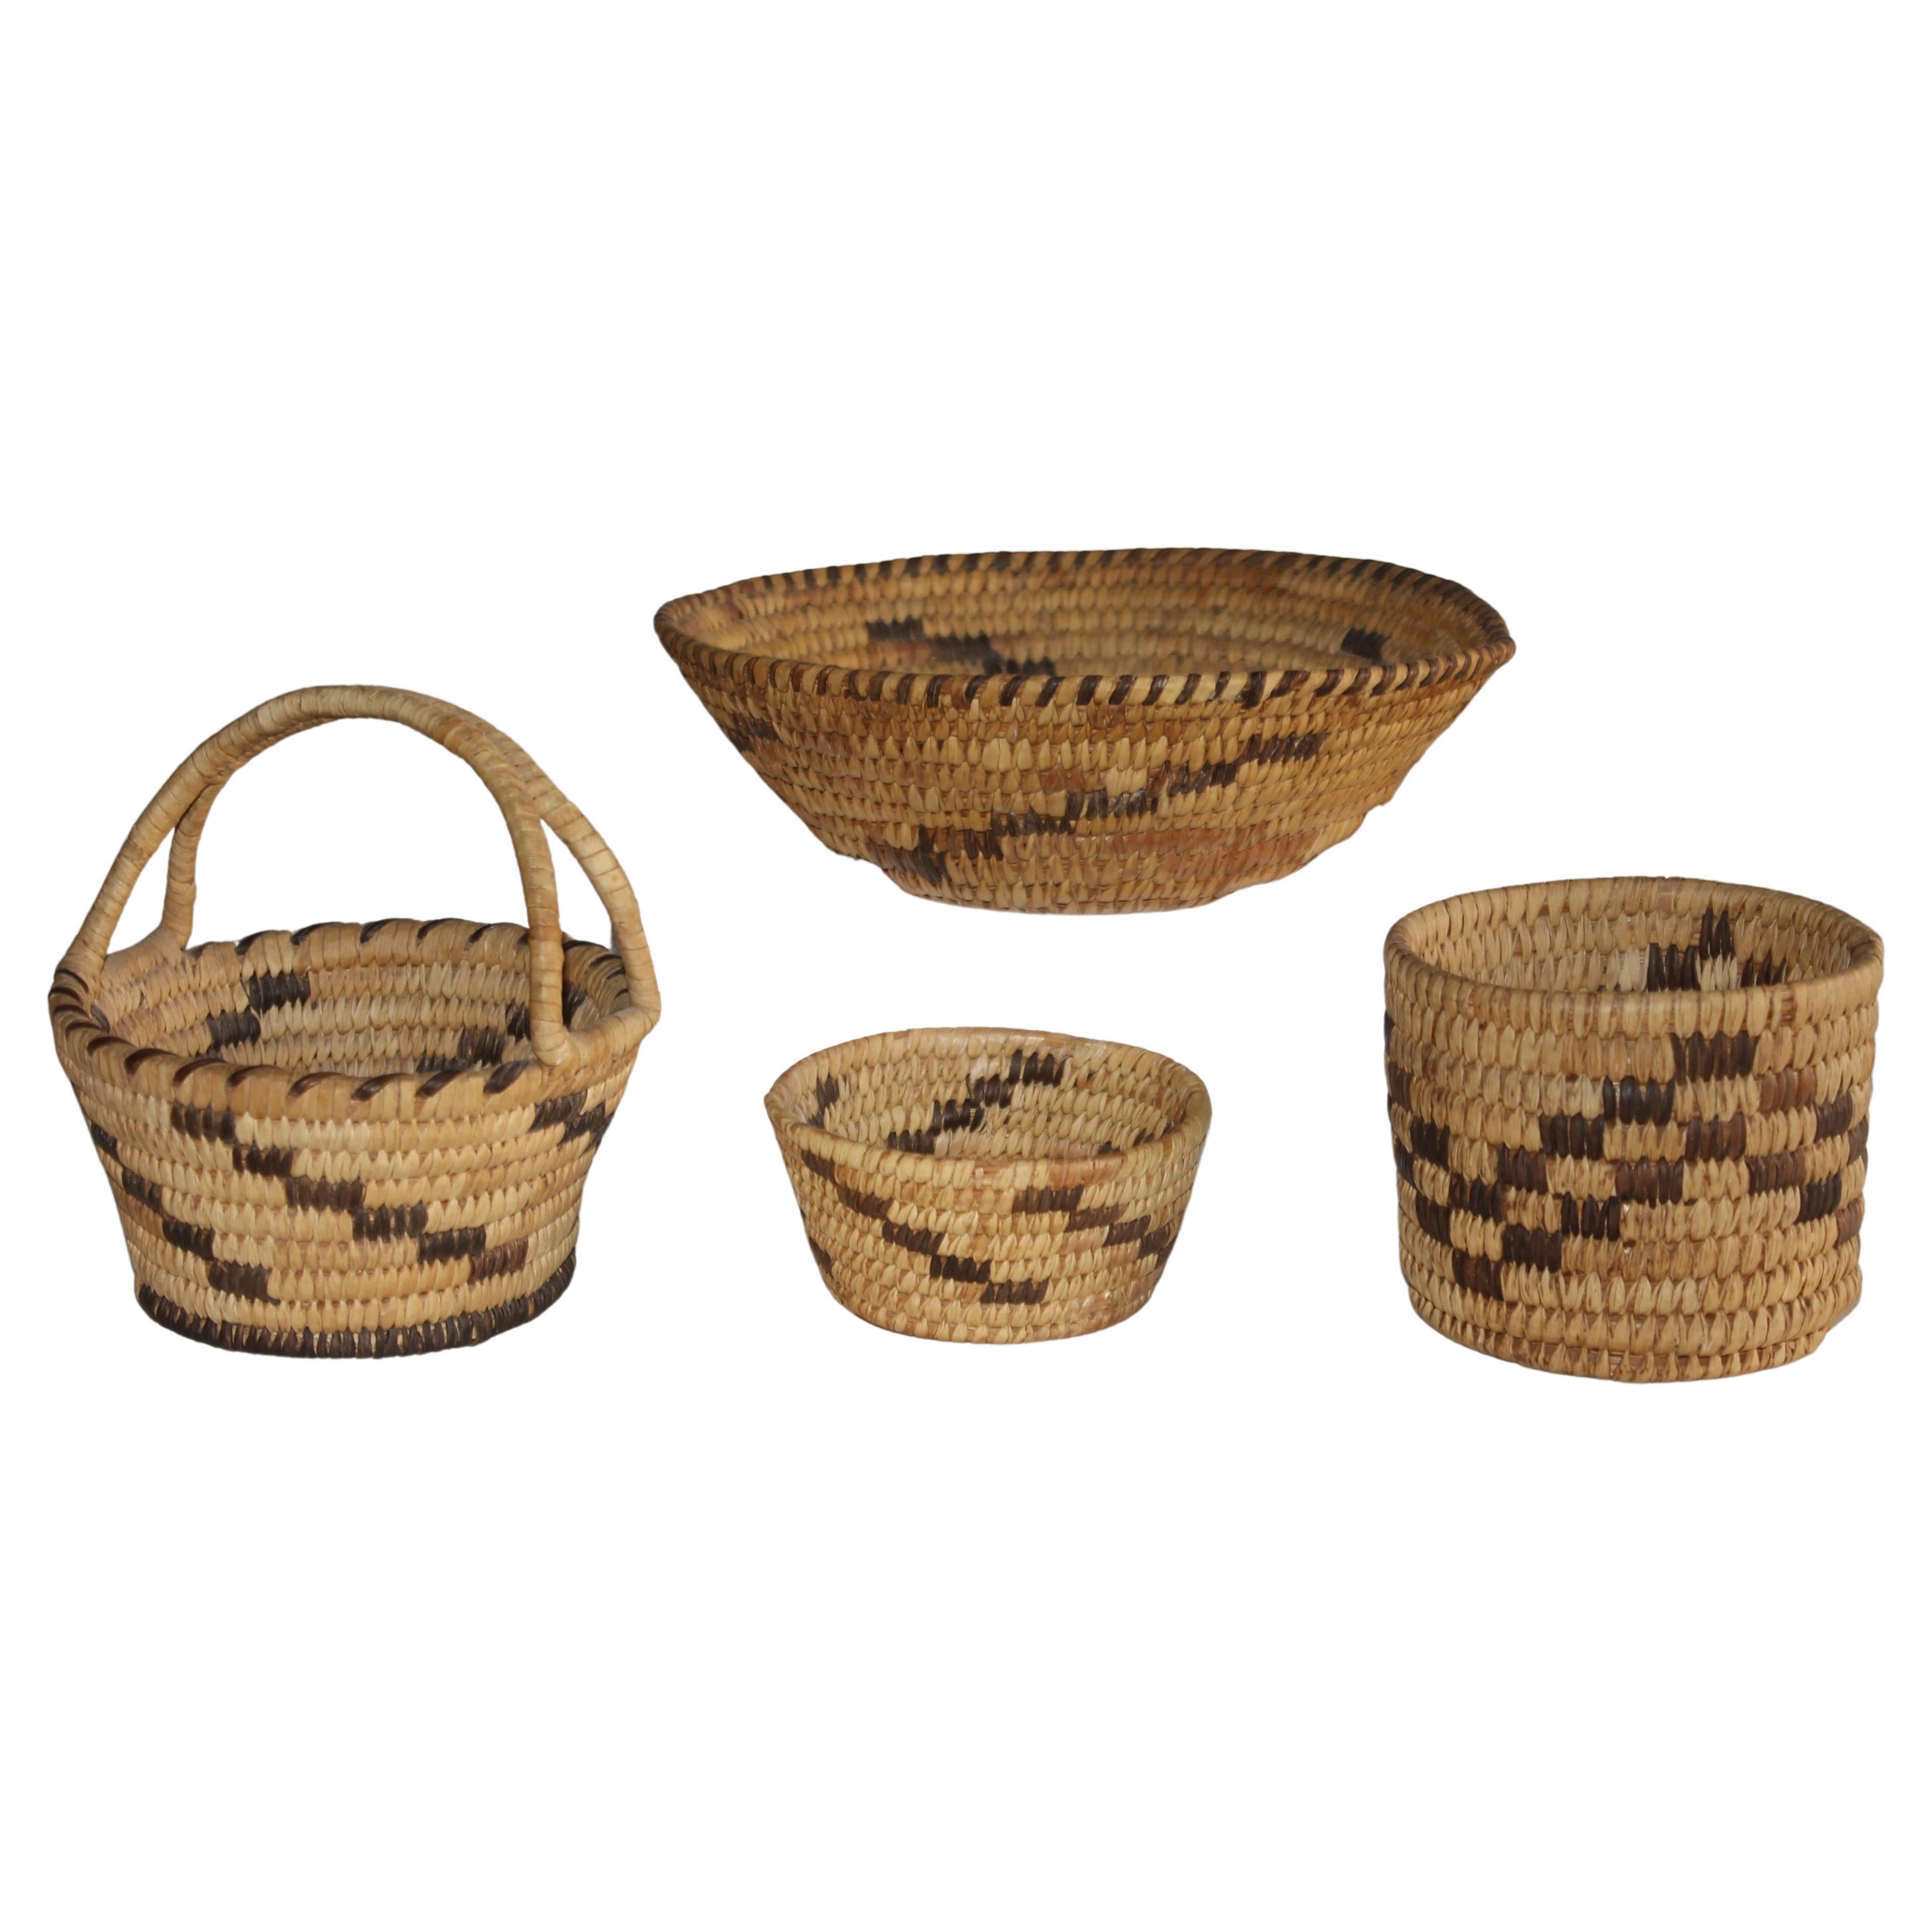 Group of 4 Small 20th C Papago Indian Baskets